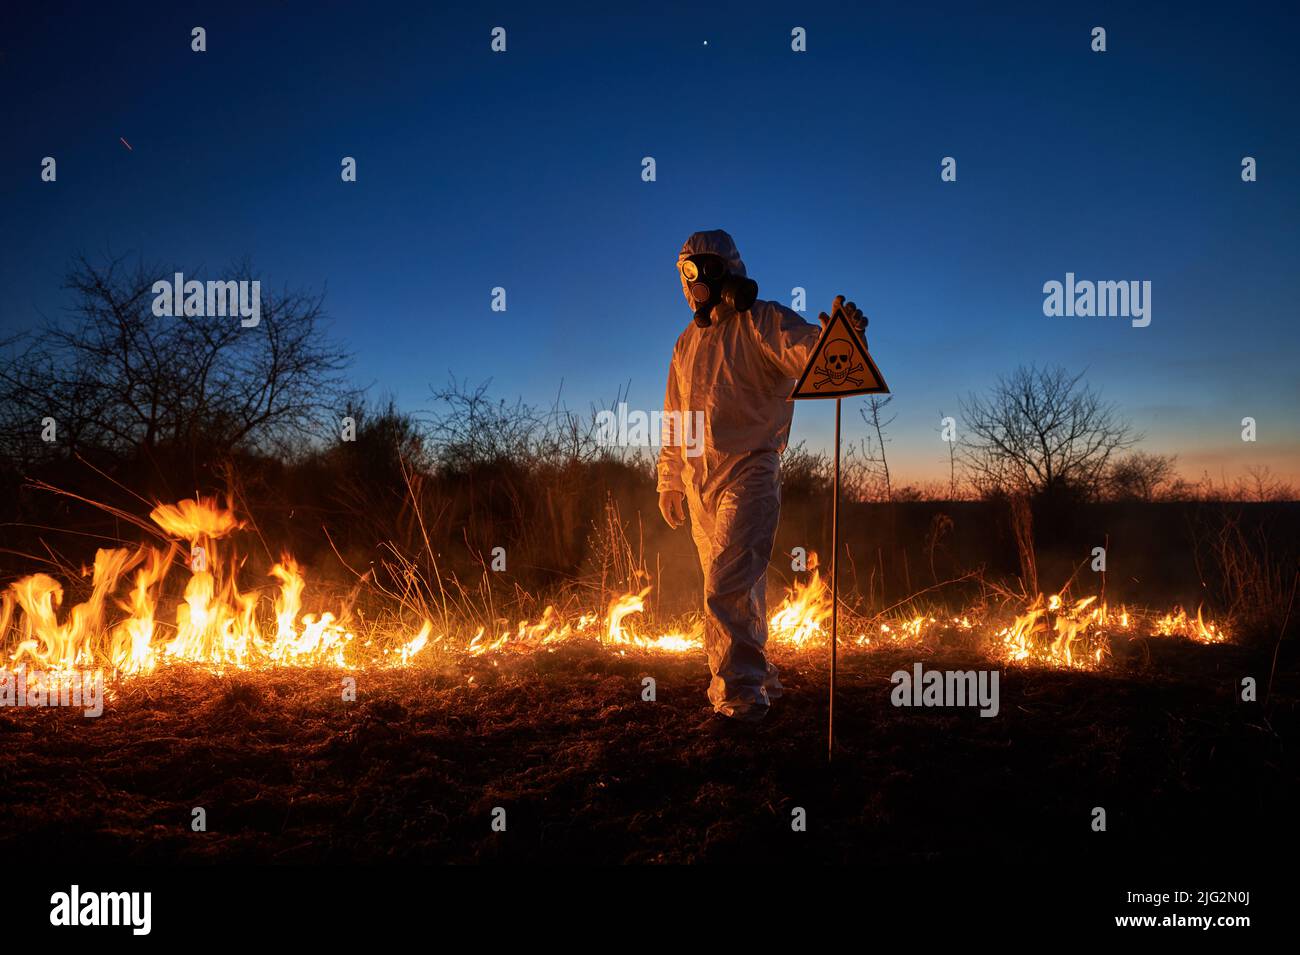 Firefighter ecologist extinguishing fire in field at night. Man in protective suit and gas mask near burning grass with smoke, holding warning sign with skull and crossbones. Natural disaster concept. Stock Photo